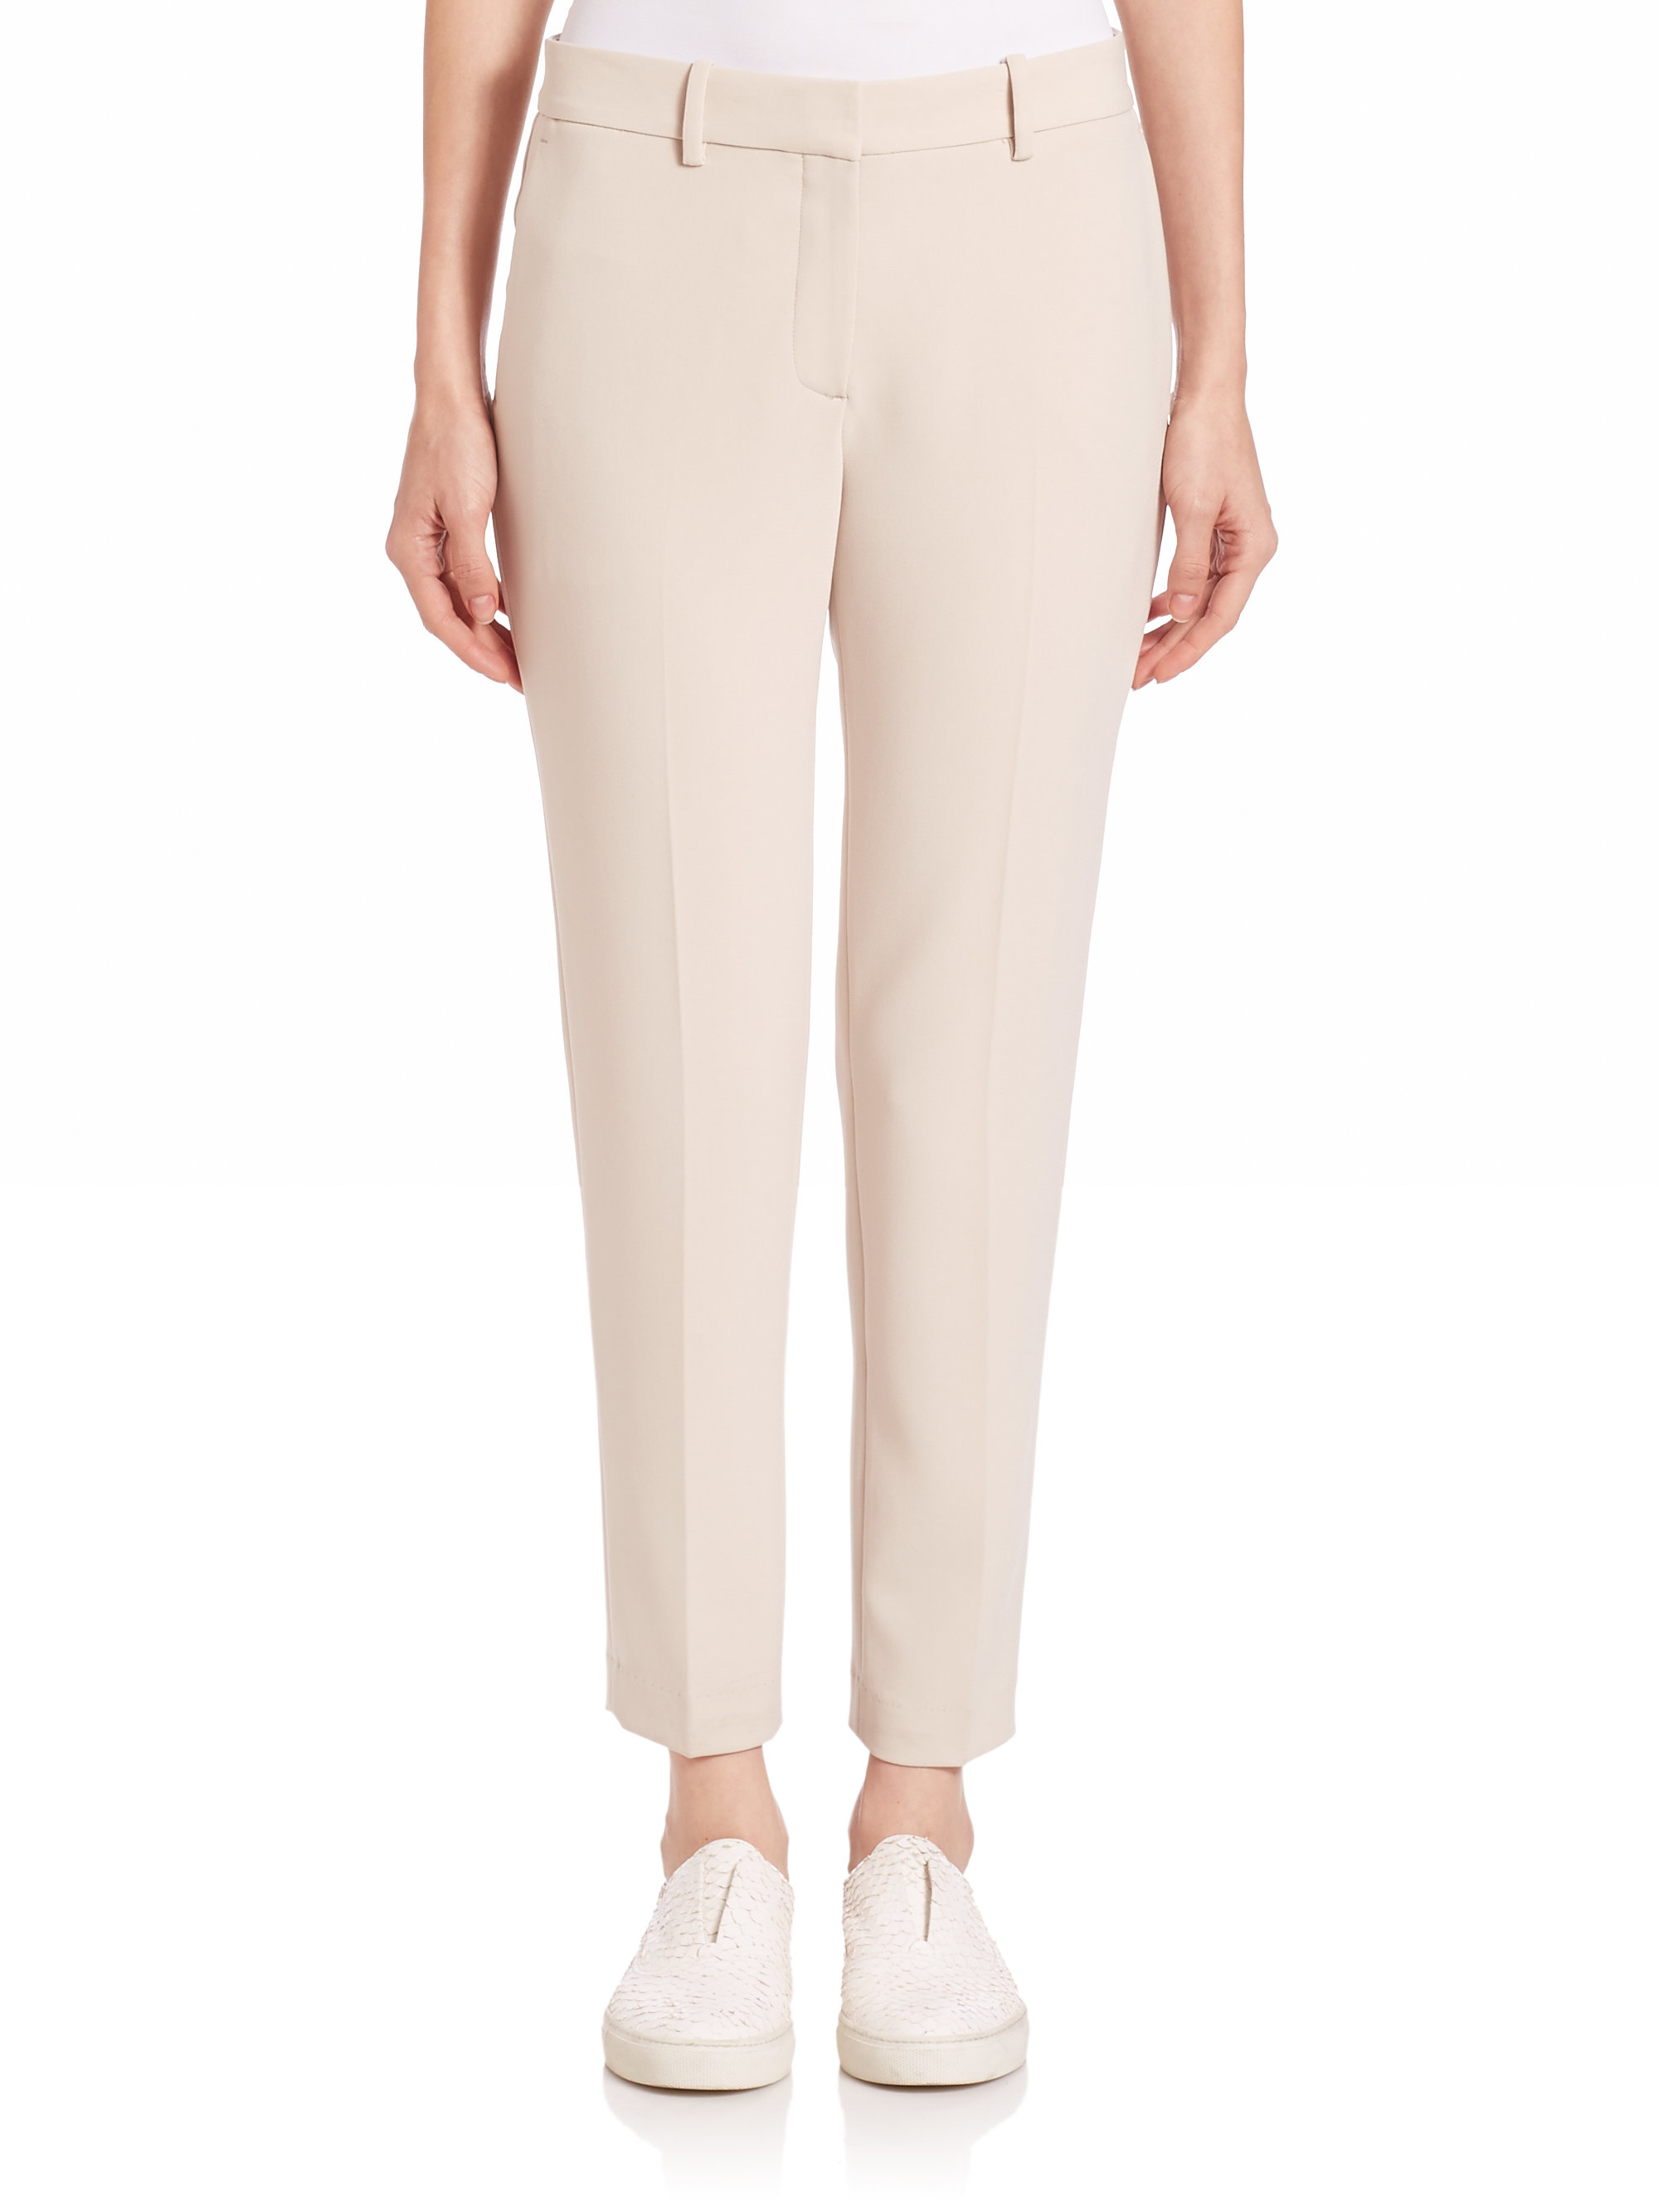 Lyst - Theory Treeca 2. Admiral Crepe Pants in Natural